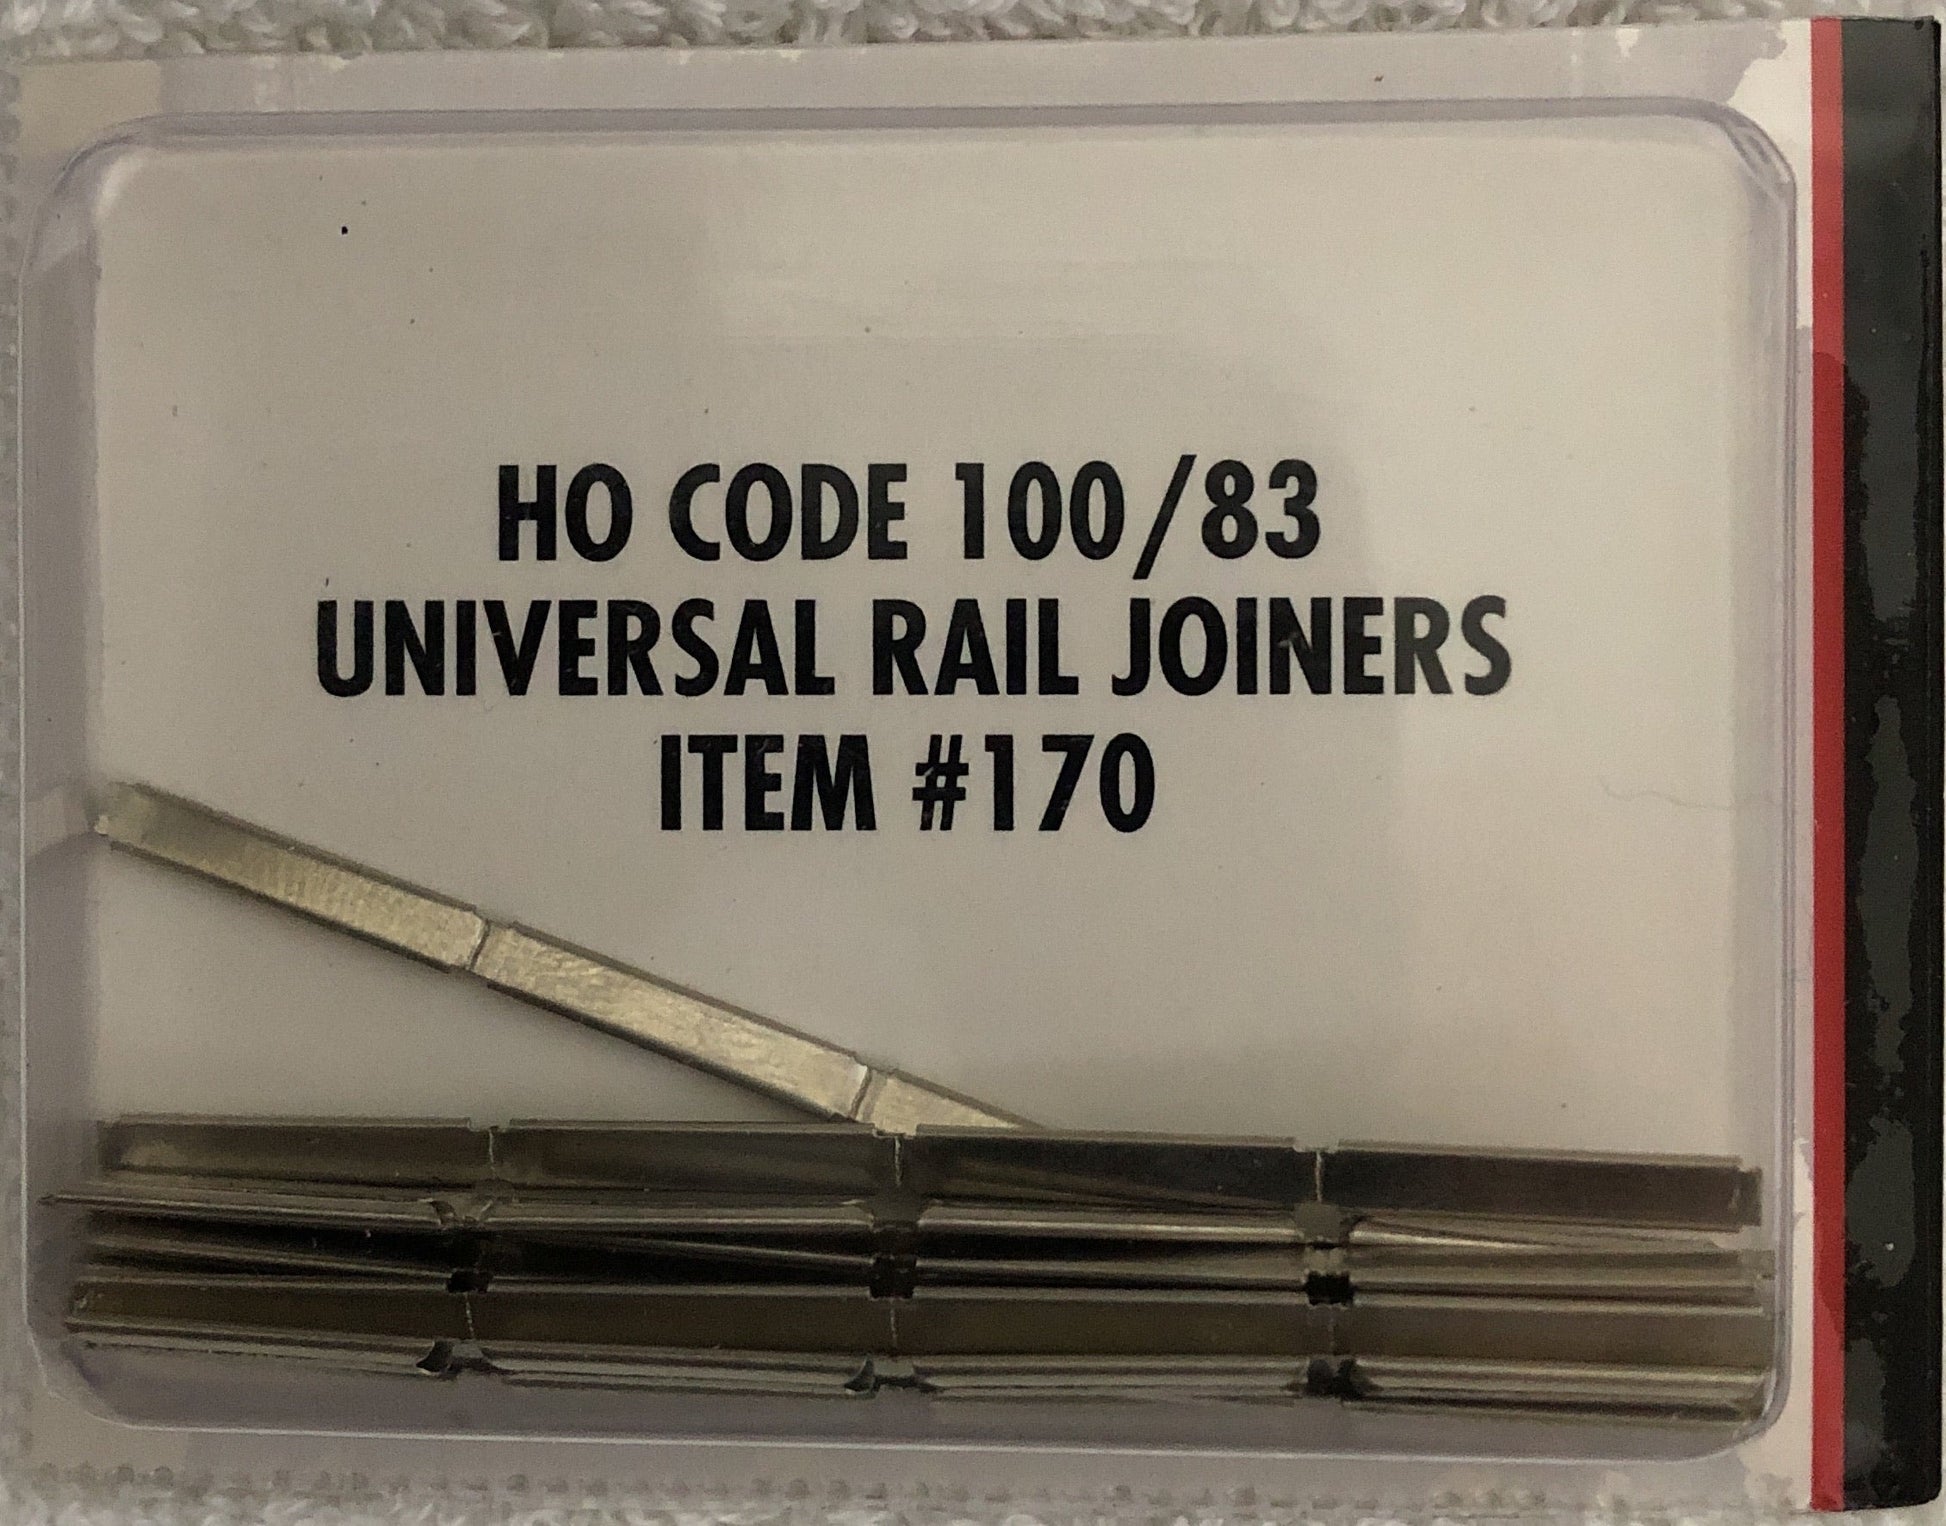  Atlas - CODE 100/83 Universal Rail Joiners for HO Scale Train Track